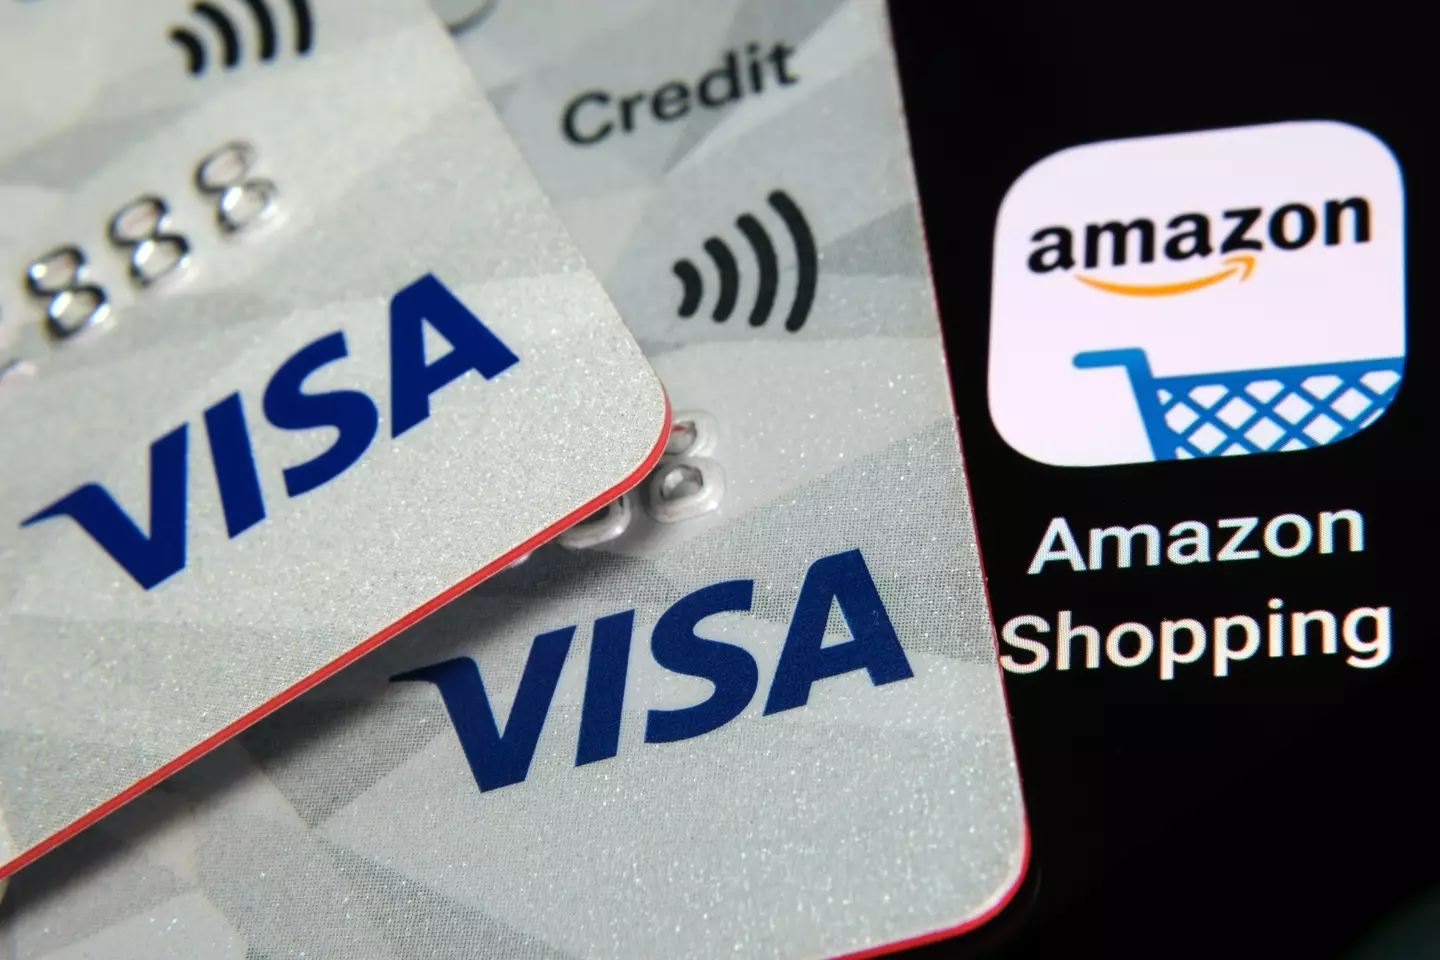 Visa and Amazon have locked heads, leading Amazon to make this decision due to soaring charges (